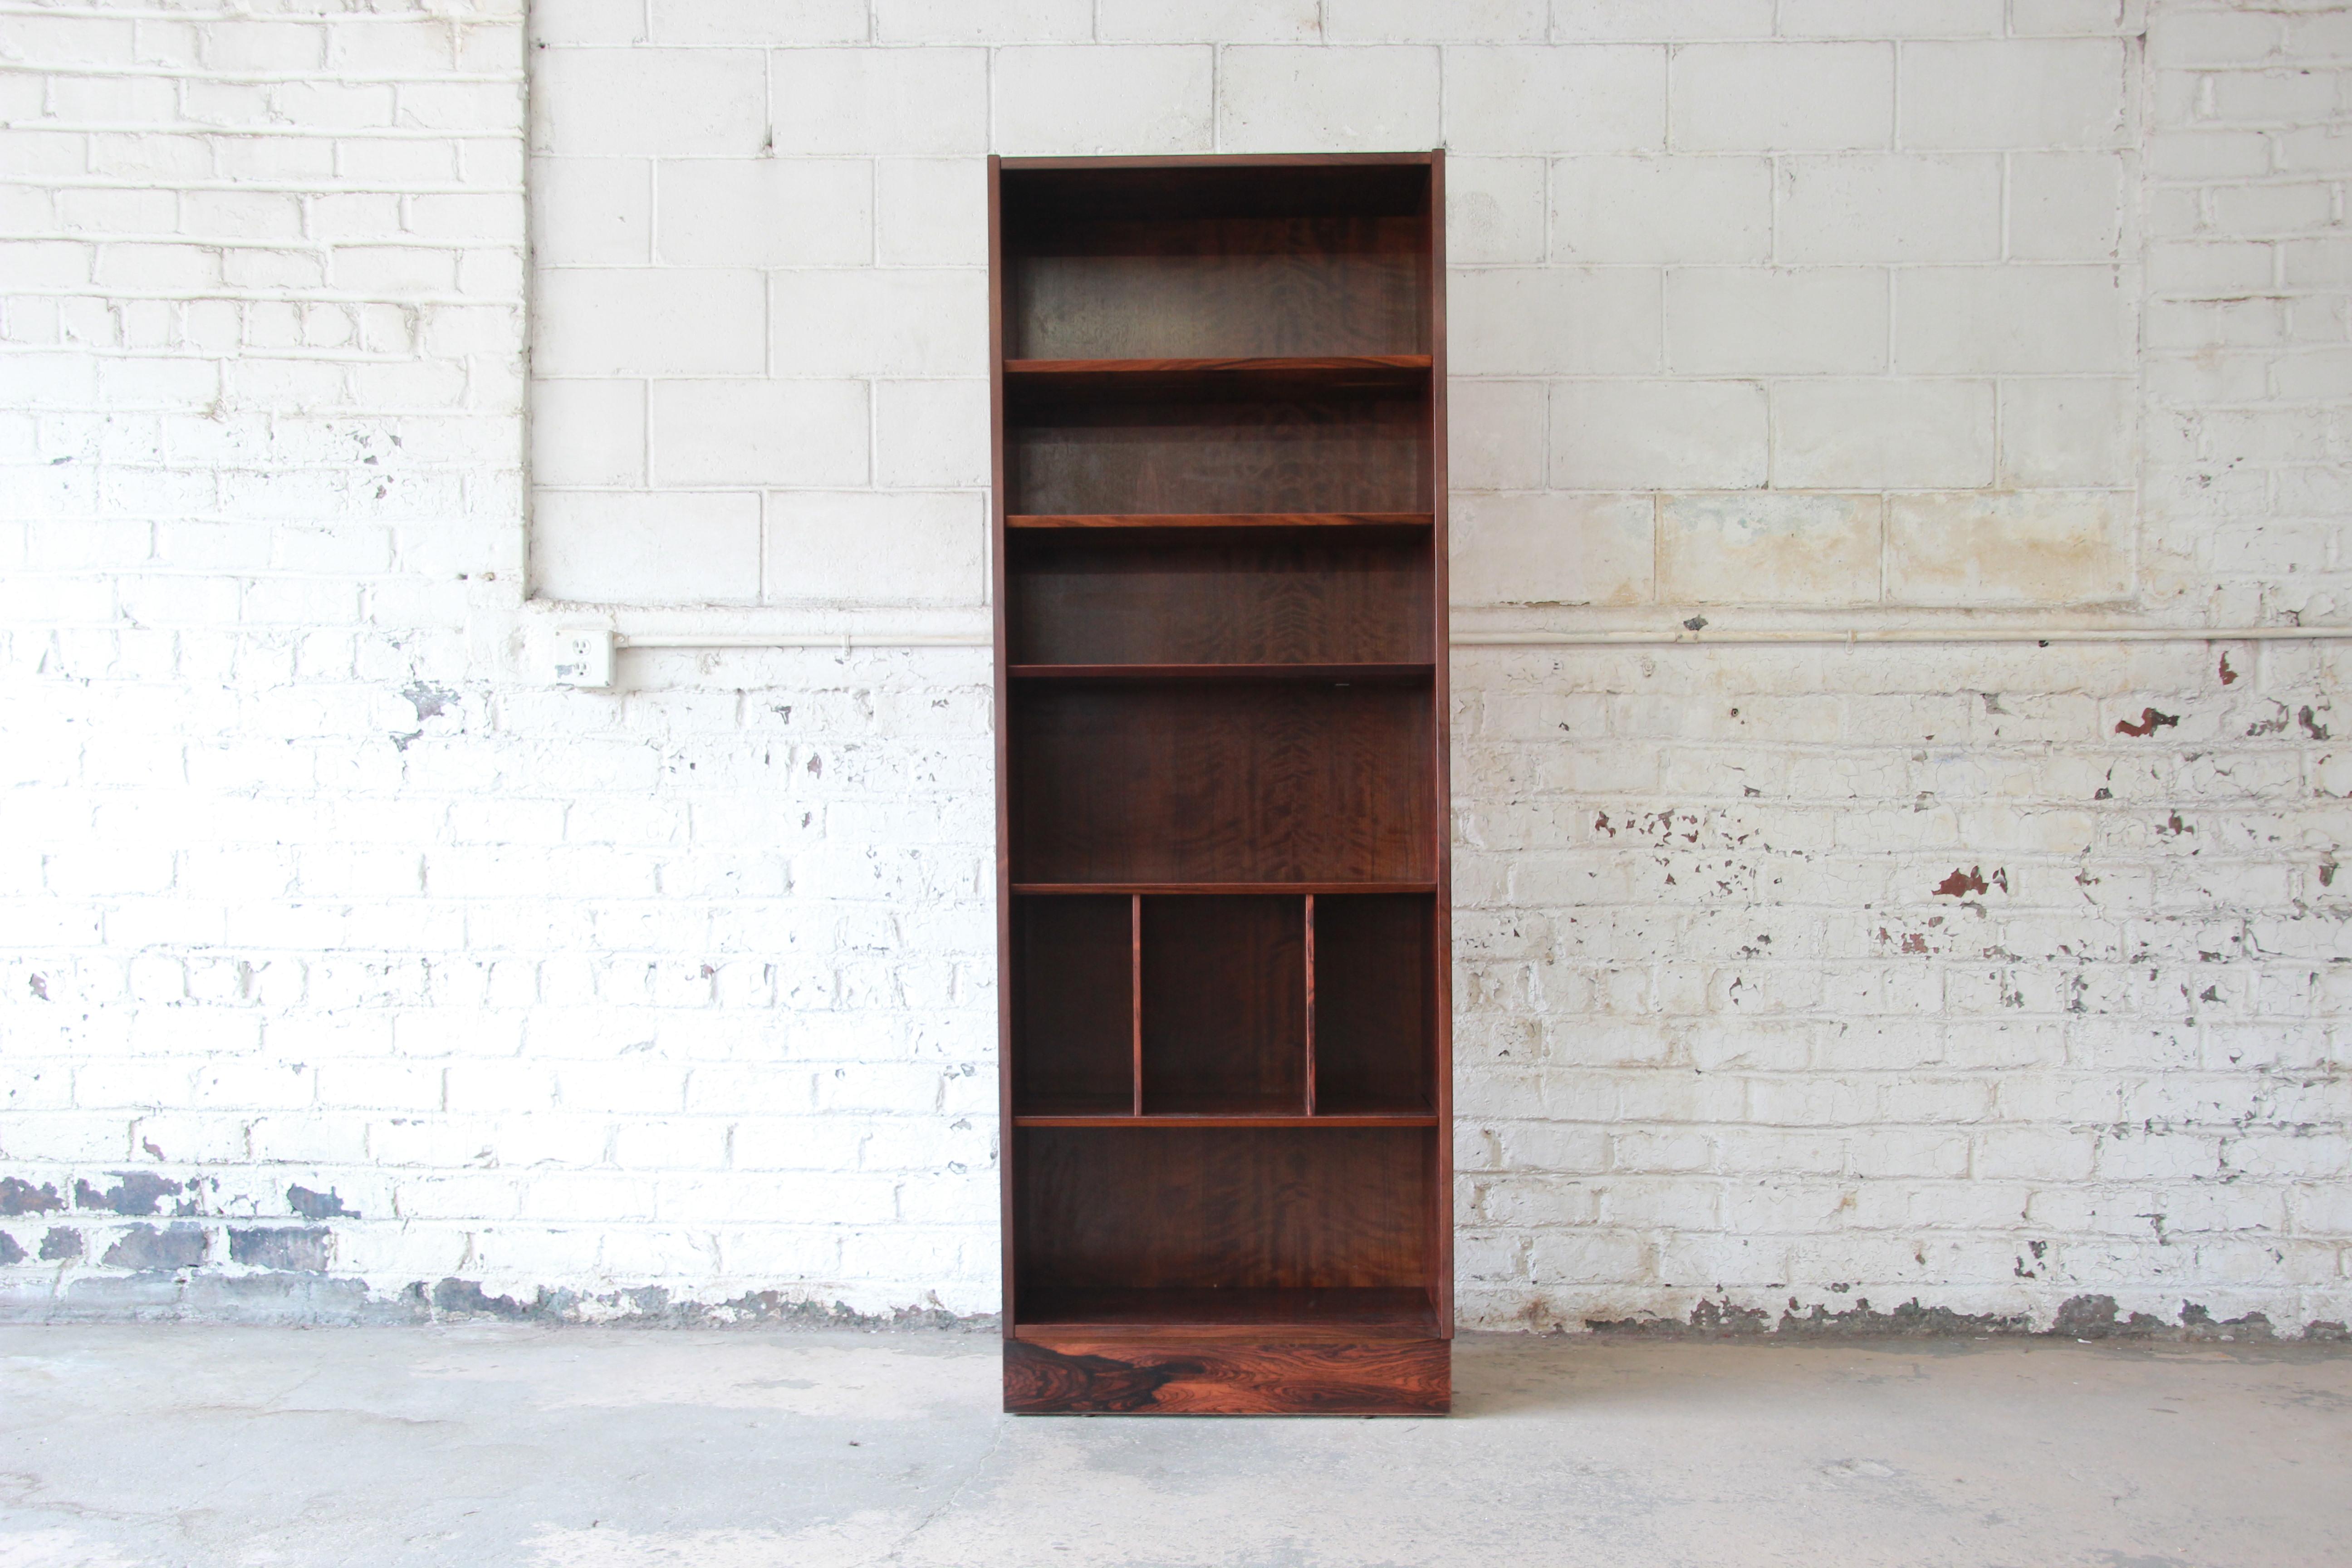 Offering an exceptional rosewood Danish modern bookcase by Paul Hundevad. This Scandinavian piece has six areas to hold your book collection or display your items. The lower portion of the bookcase offers two dividers in one of the sections as a